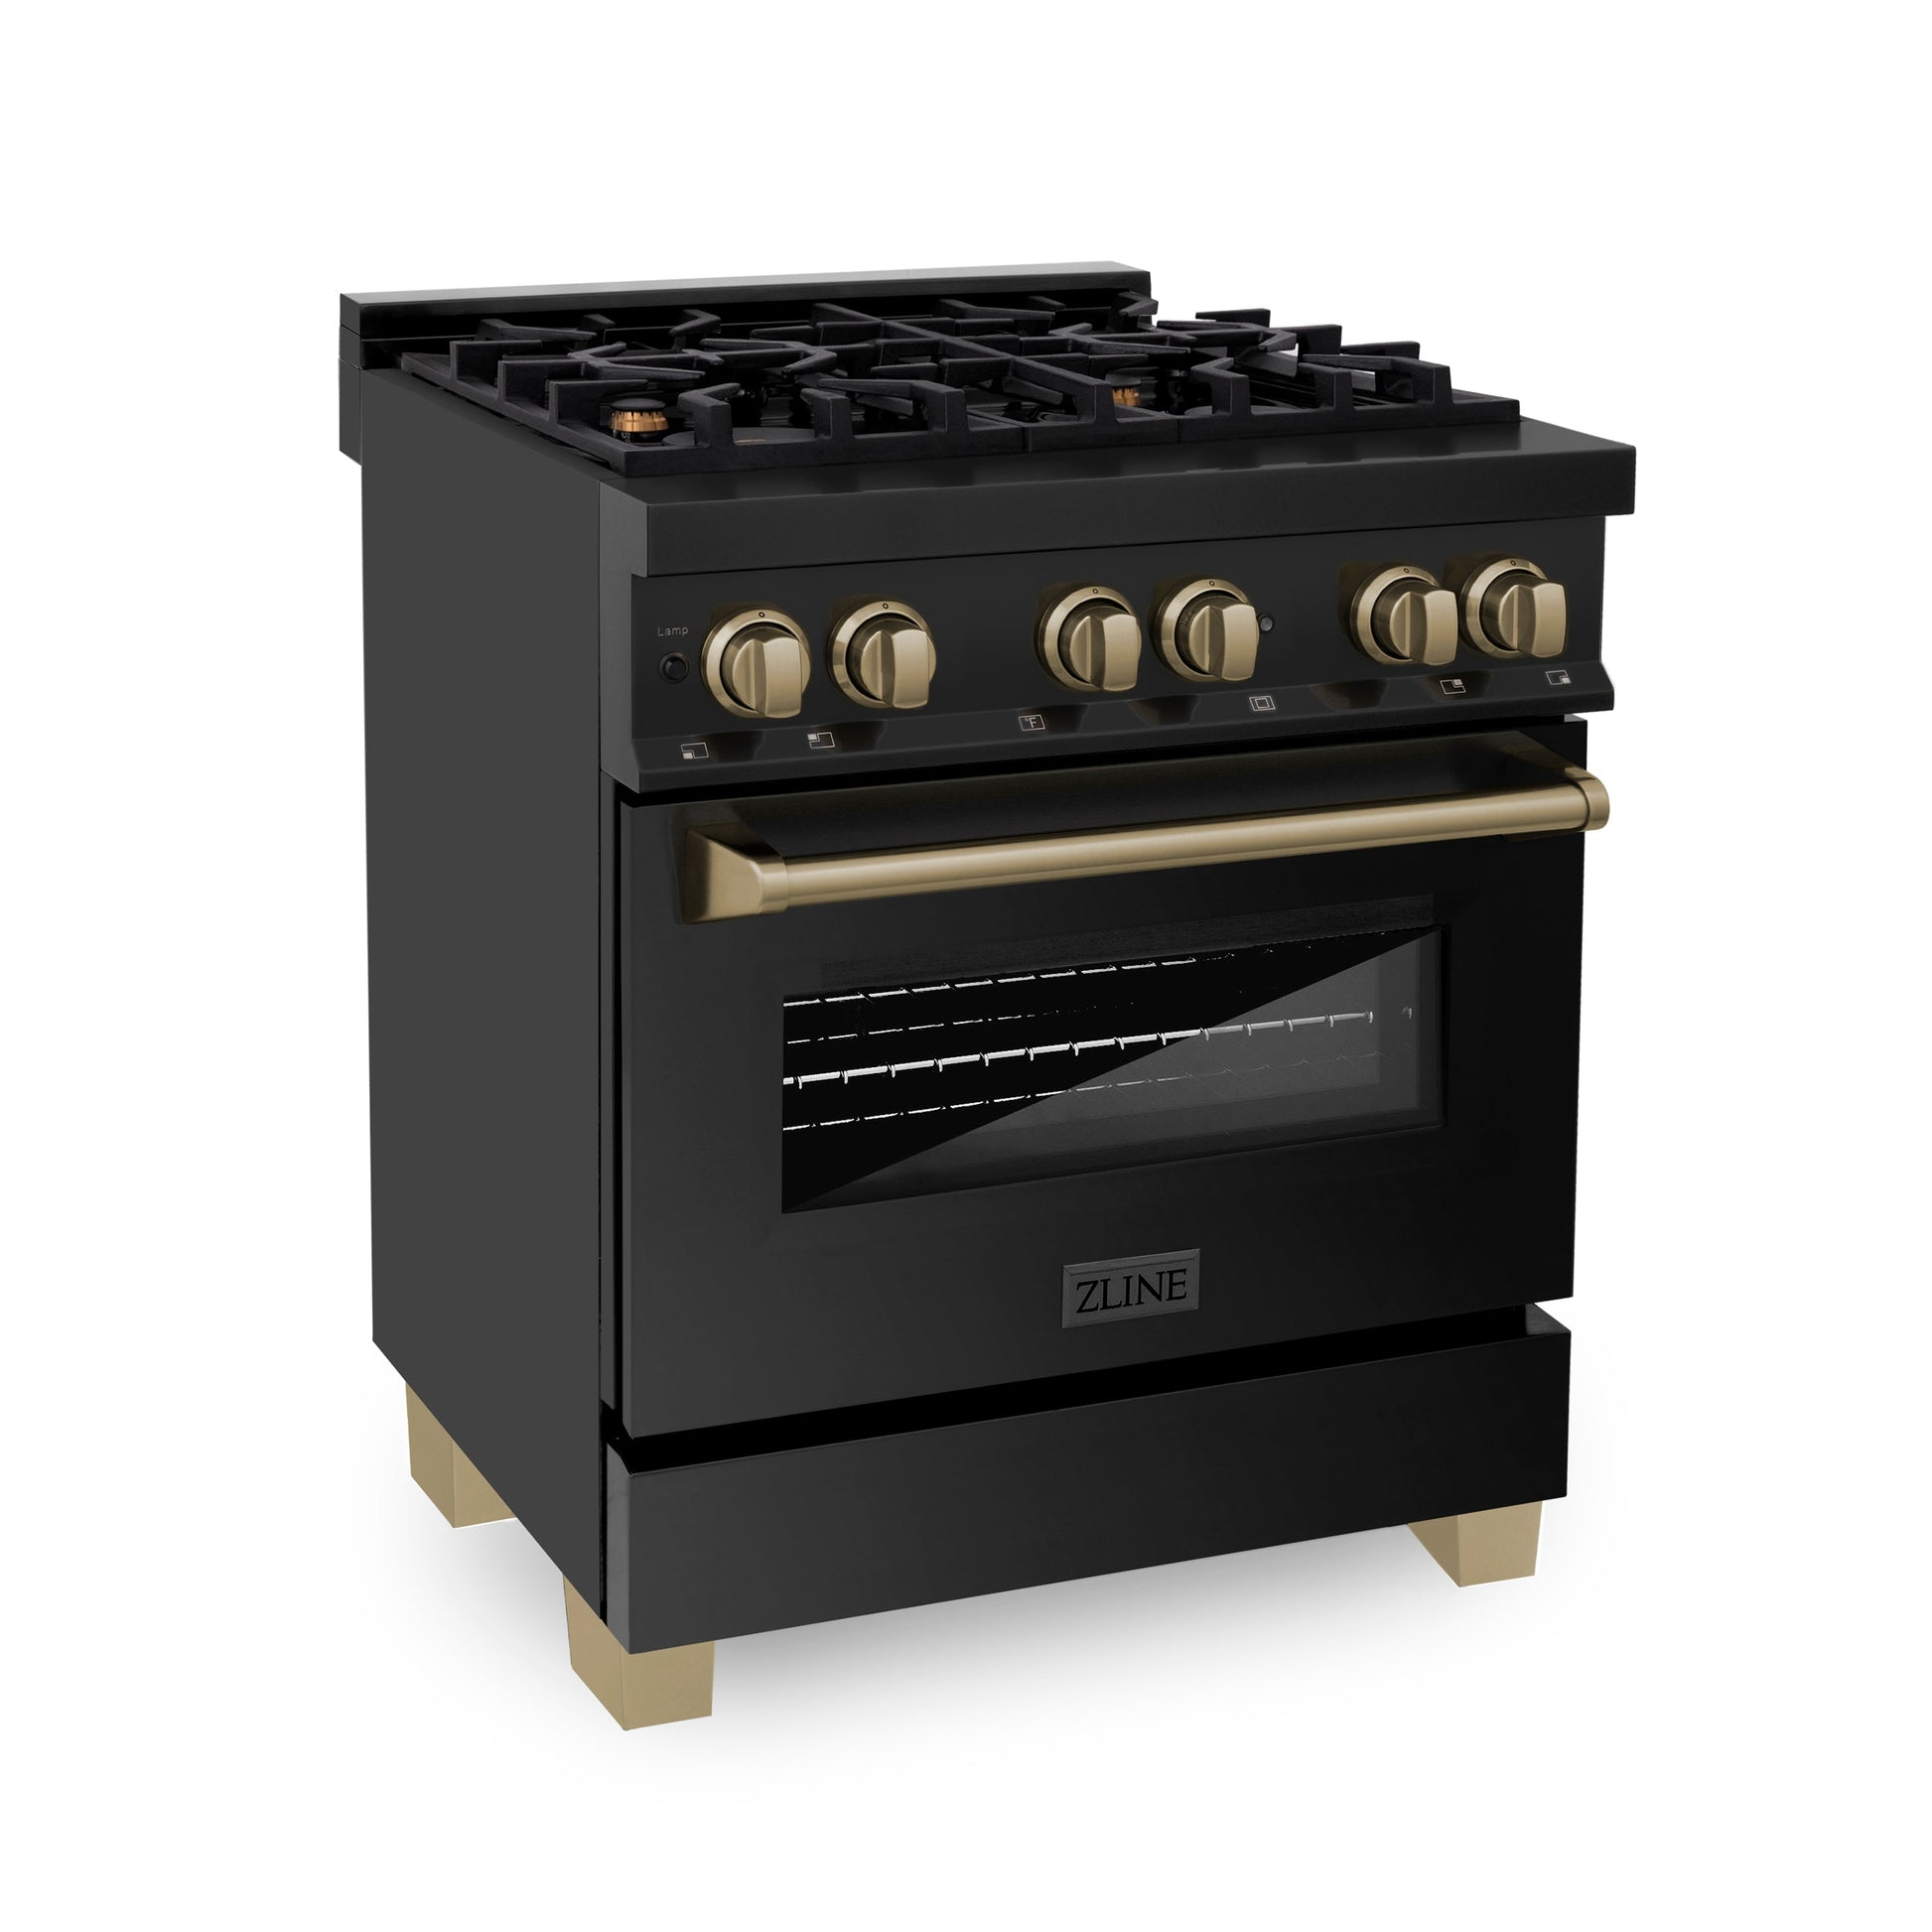 ZLINE Autograph Edition 30" Dual Fuel Range with Gas Stove and Electric Oven - Black Stainless Steel with Accents